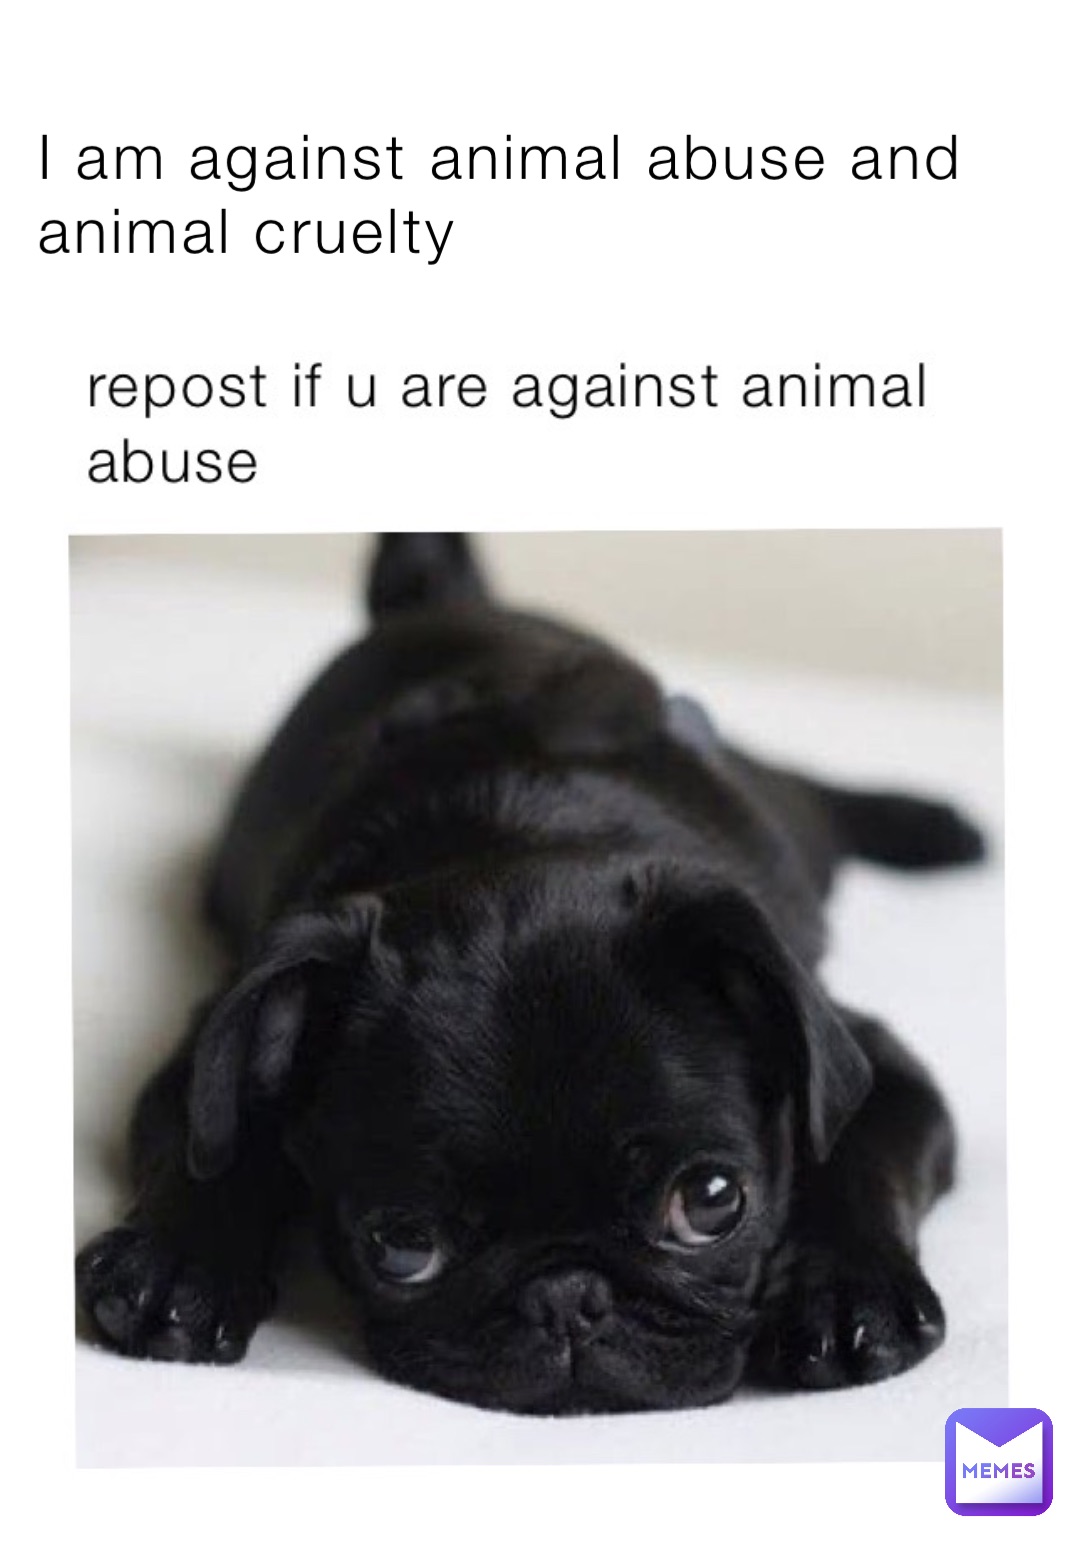 I am against animal abuse and animal cruelty